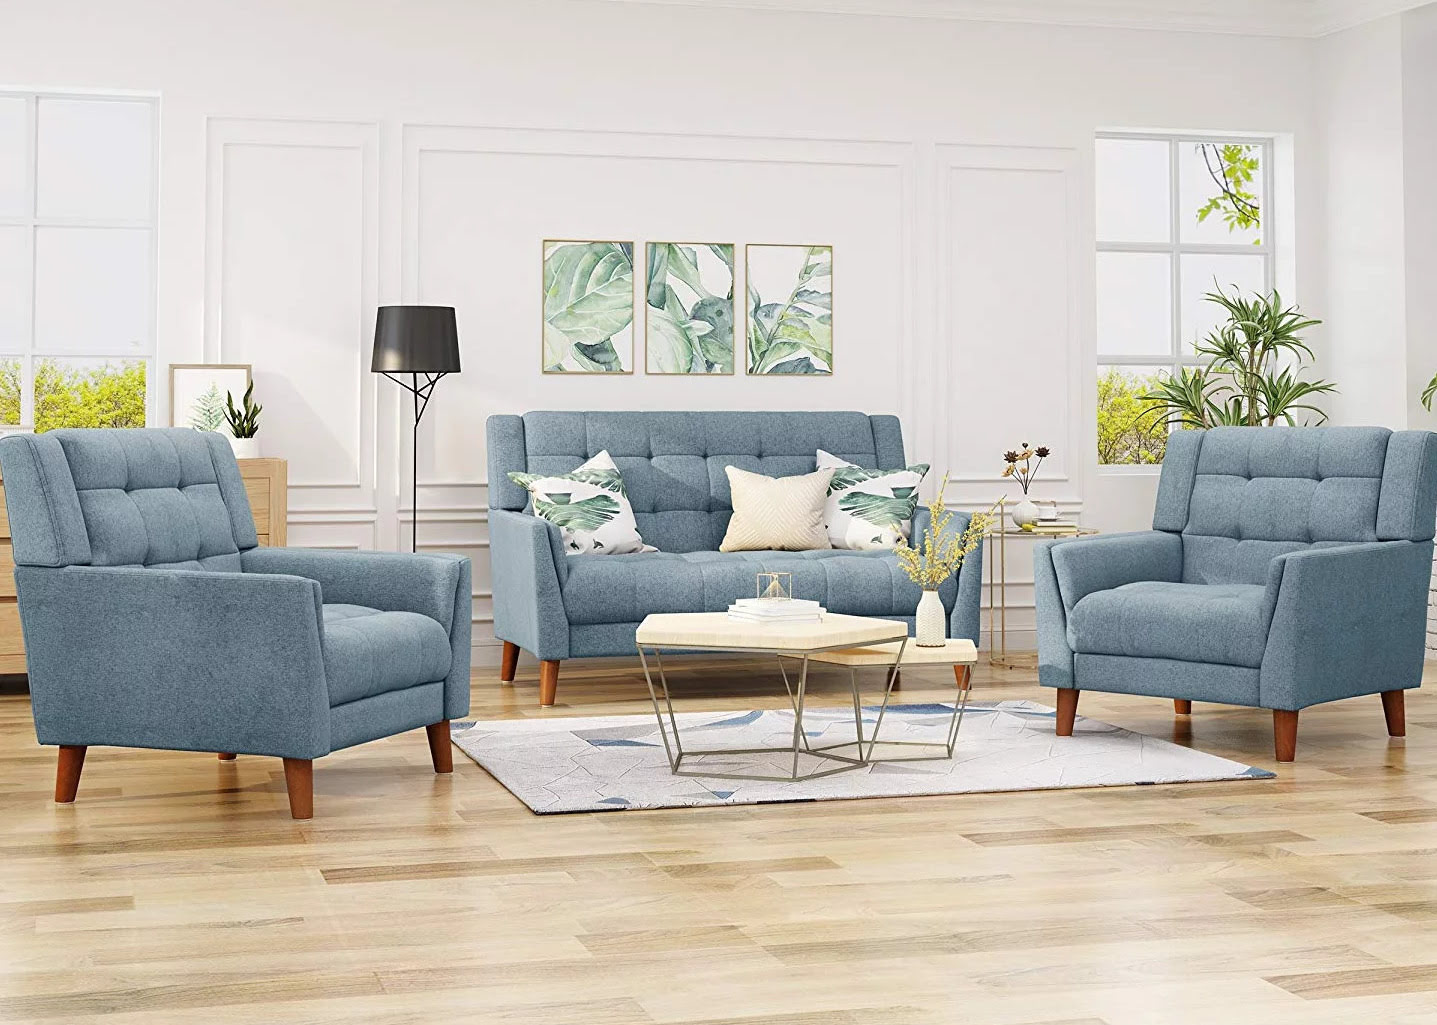 What Is The Best Living Room Furniture To Buy